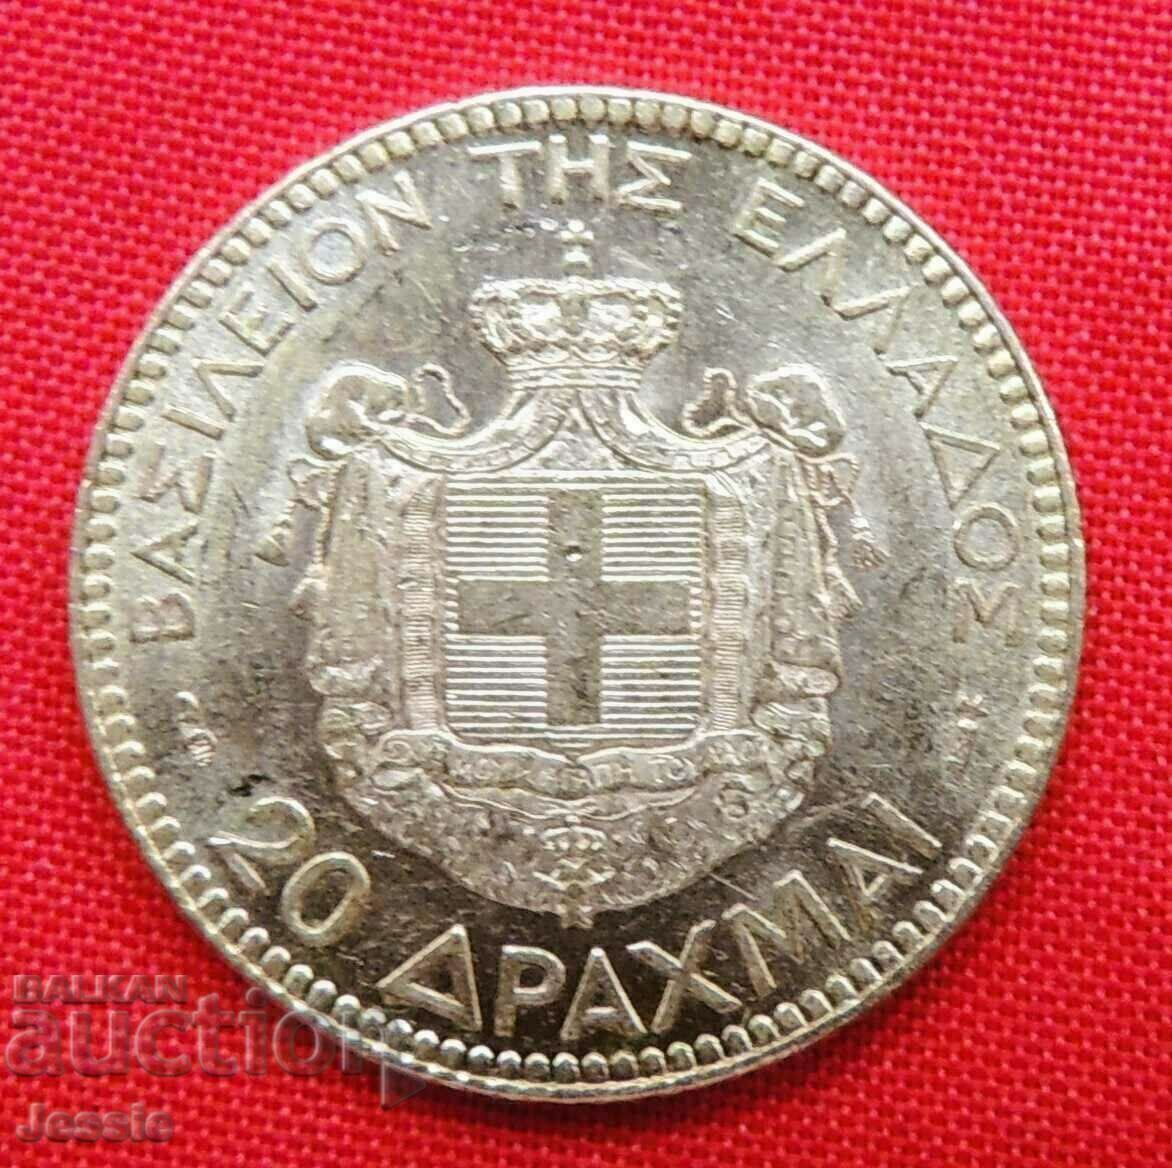 GREECE 20 Drachmas (gold) 1884 Compare and Rate!